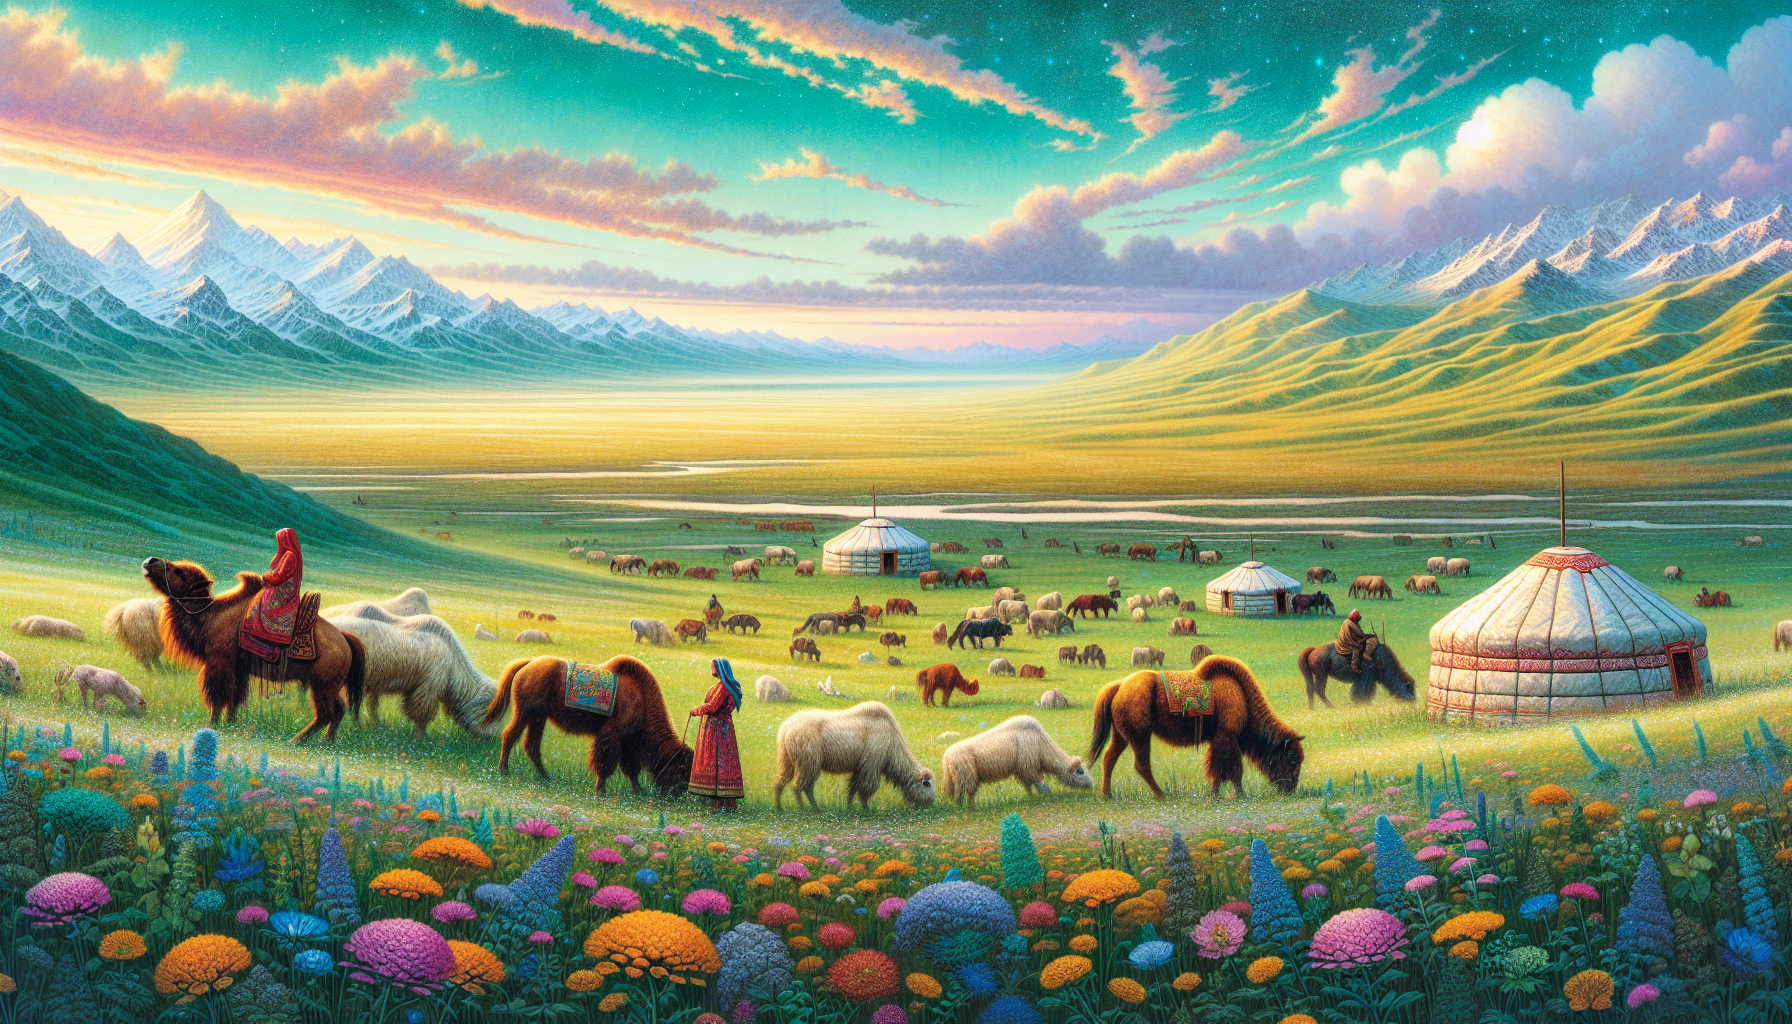 A vibrant landscape in Mongolia in spring